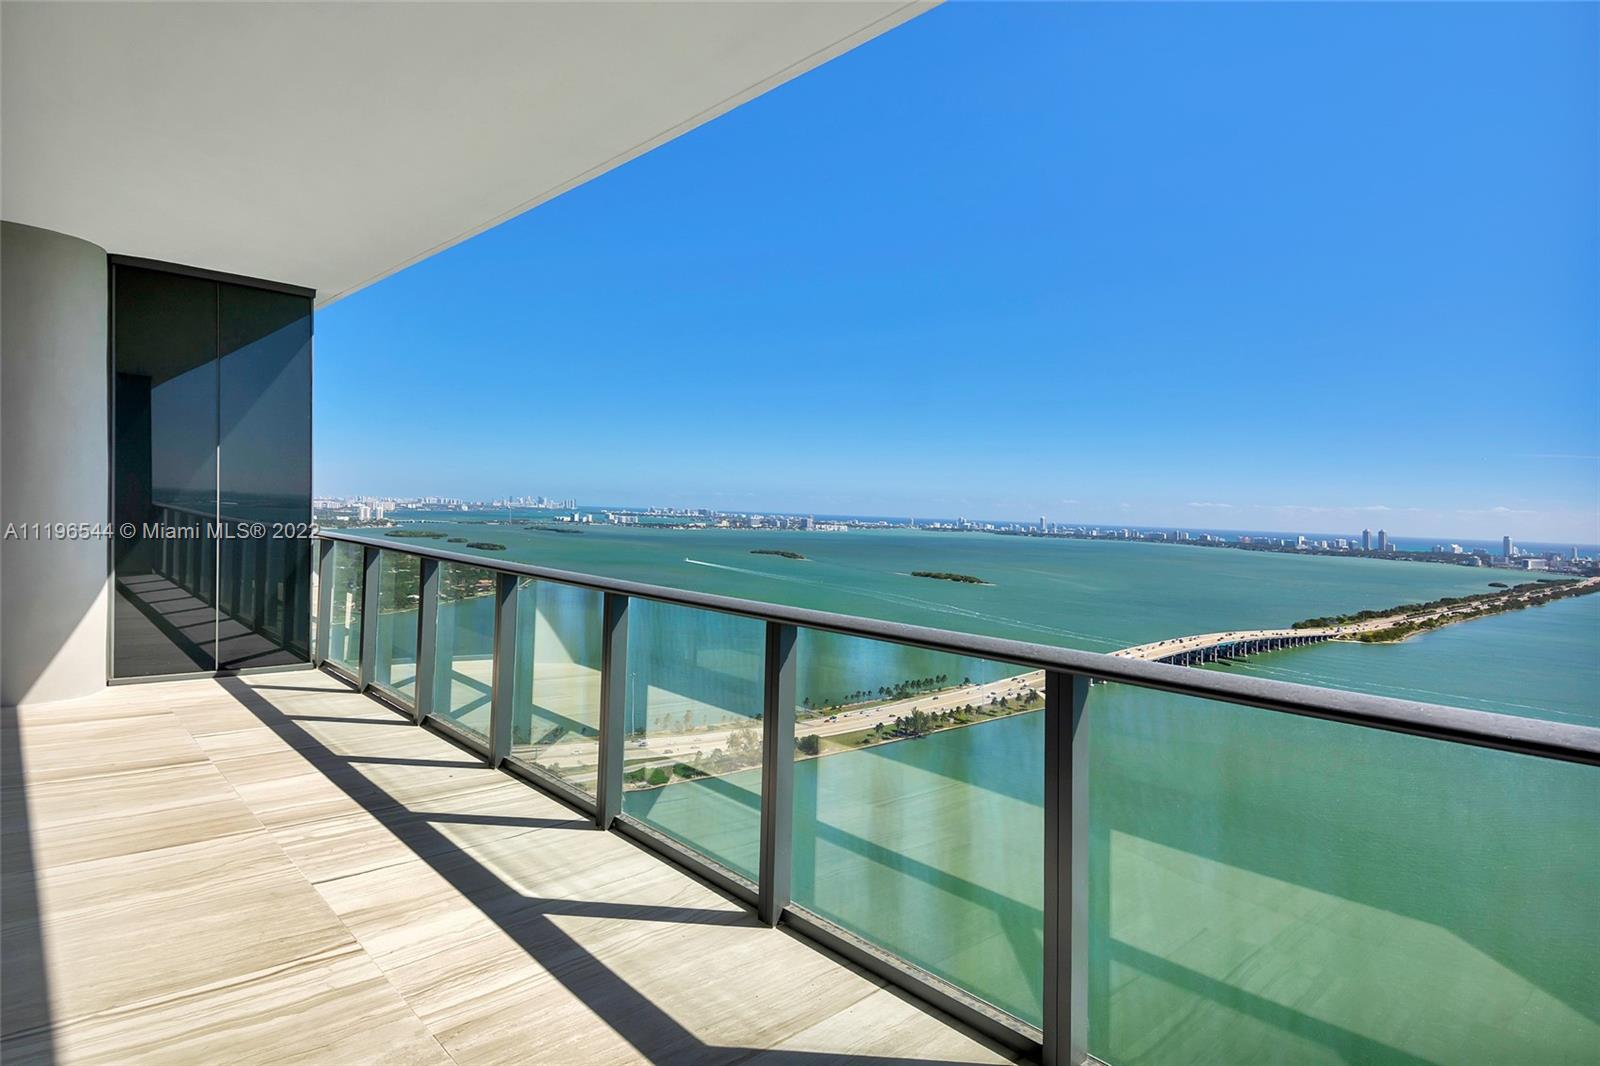 Most Amazing Unit 3 BR W/ WATER VIEWS IN ‘04 LINE! 2,034 SF - 3BR/3.5BA + DEN Condo in Edgewater trendy, luxury development PARAISO DISTRICT. Includes top of the line appliances, custom made closets and luxurious master bath w/ dual sink vanity, shower and tub. This unit features private elevator foyer, 9ft ceilings, porcelain floors, open living/dining area & 354 sqft of balcony looking at Biscayne Bay and Miami Beach. One Paraiso offers state of the art amenities including exercise rooms, yoga room, hydrotherapy pool, massage therapy room, steam and sauna, tennis, virtual golf room, movie theater, wine room, resort like pool and BBQ area, cabanas, pool tables, concierge service. Minutes away from Midtown, the Design District, Wynwood, Miami Beach and Downtown.